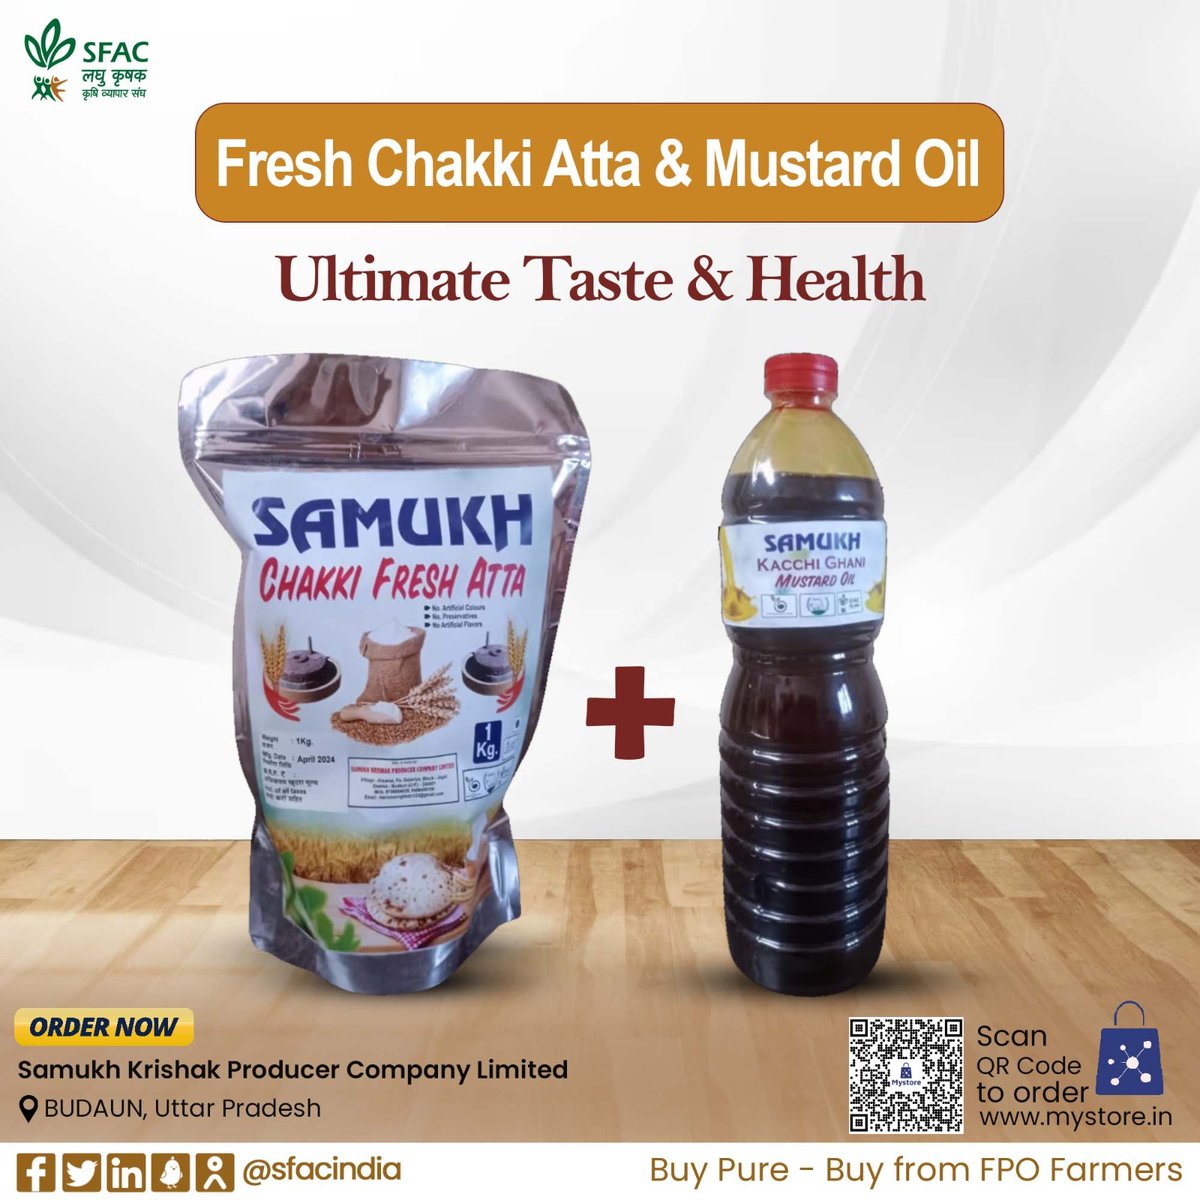 Buy a compo of fiber-rich chakki atta promoting digestive health & weight loss & pure wood-pressed mustard oil boosting immunity.

Order straight from FPO farmers👇

mystore.in/en/product/sam…

🥘

 #VocalForLocal #healthychoices #healthyeating #healthyhabits #tastyrecipes